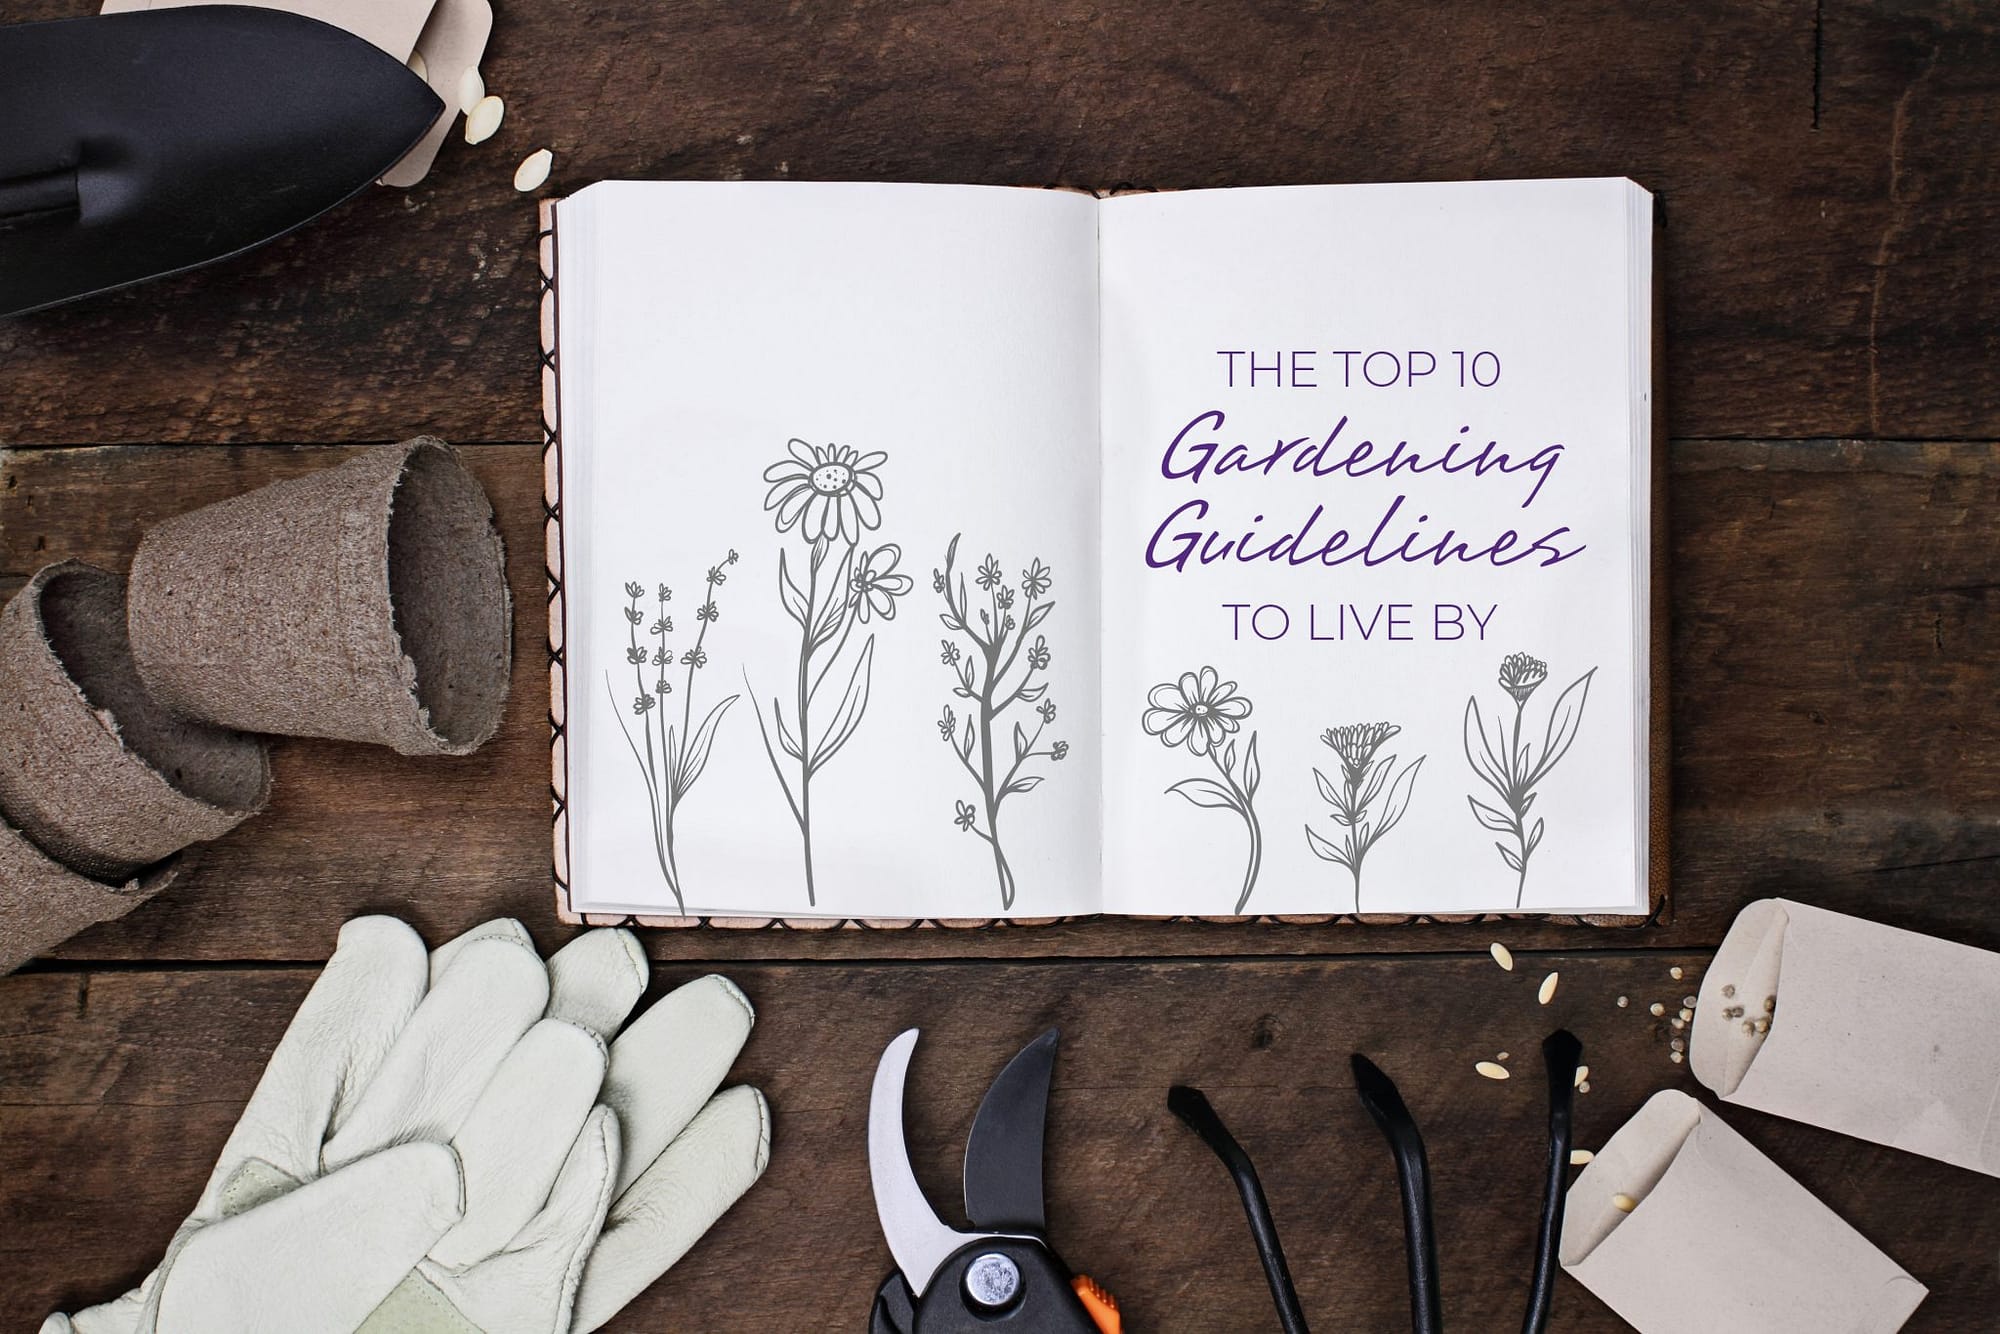 Gardening journal for the 'Resilient Gardener, featuring the top 10 Adaptive Gardening Guidelines